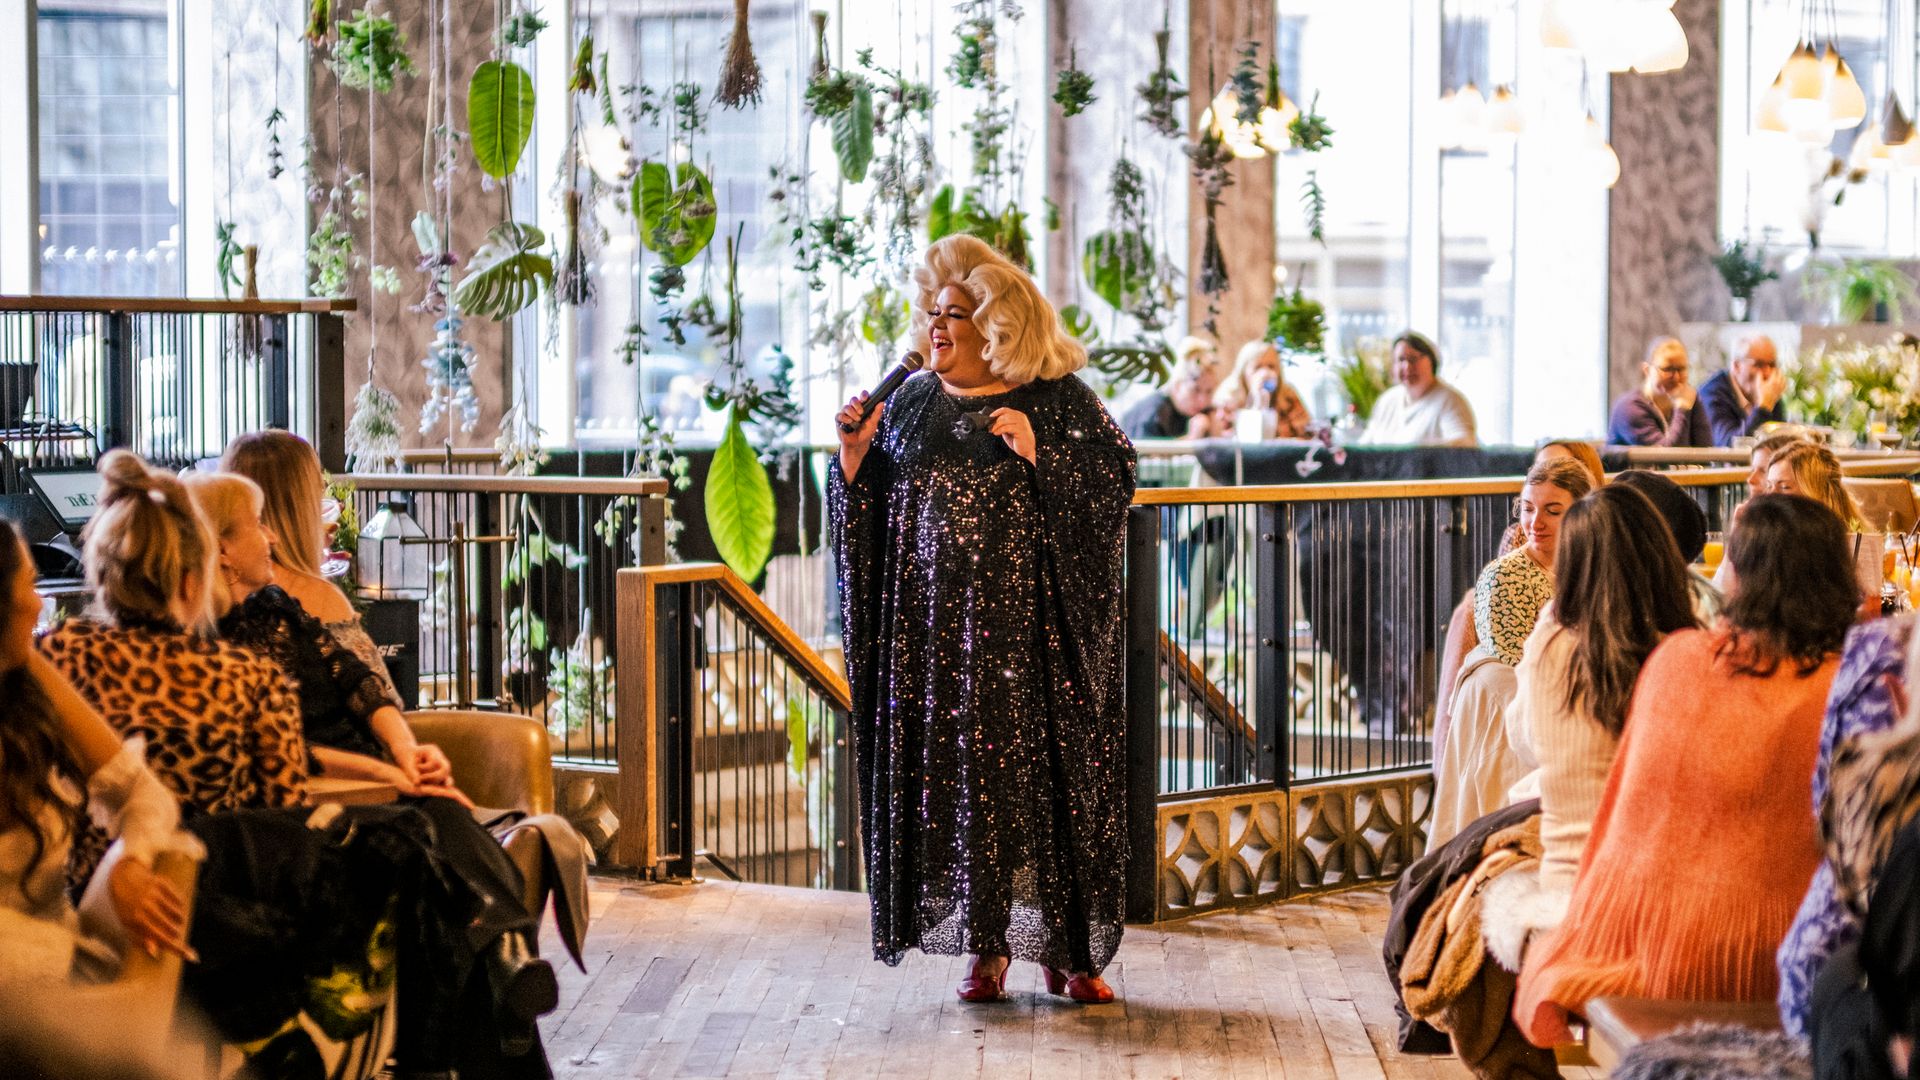 A drag queen performing inside a building